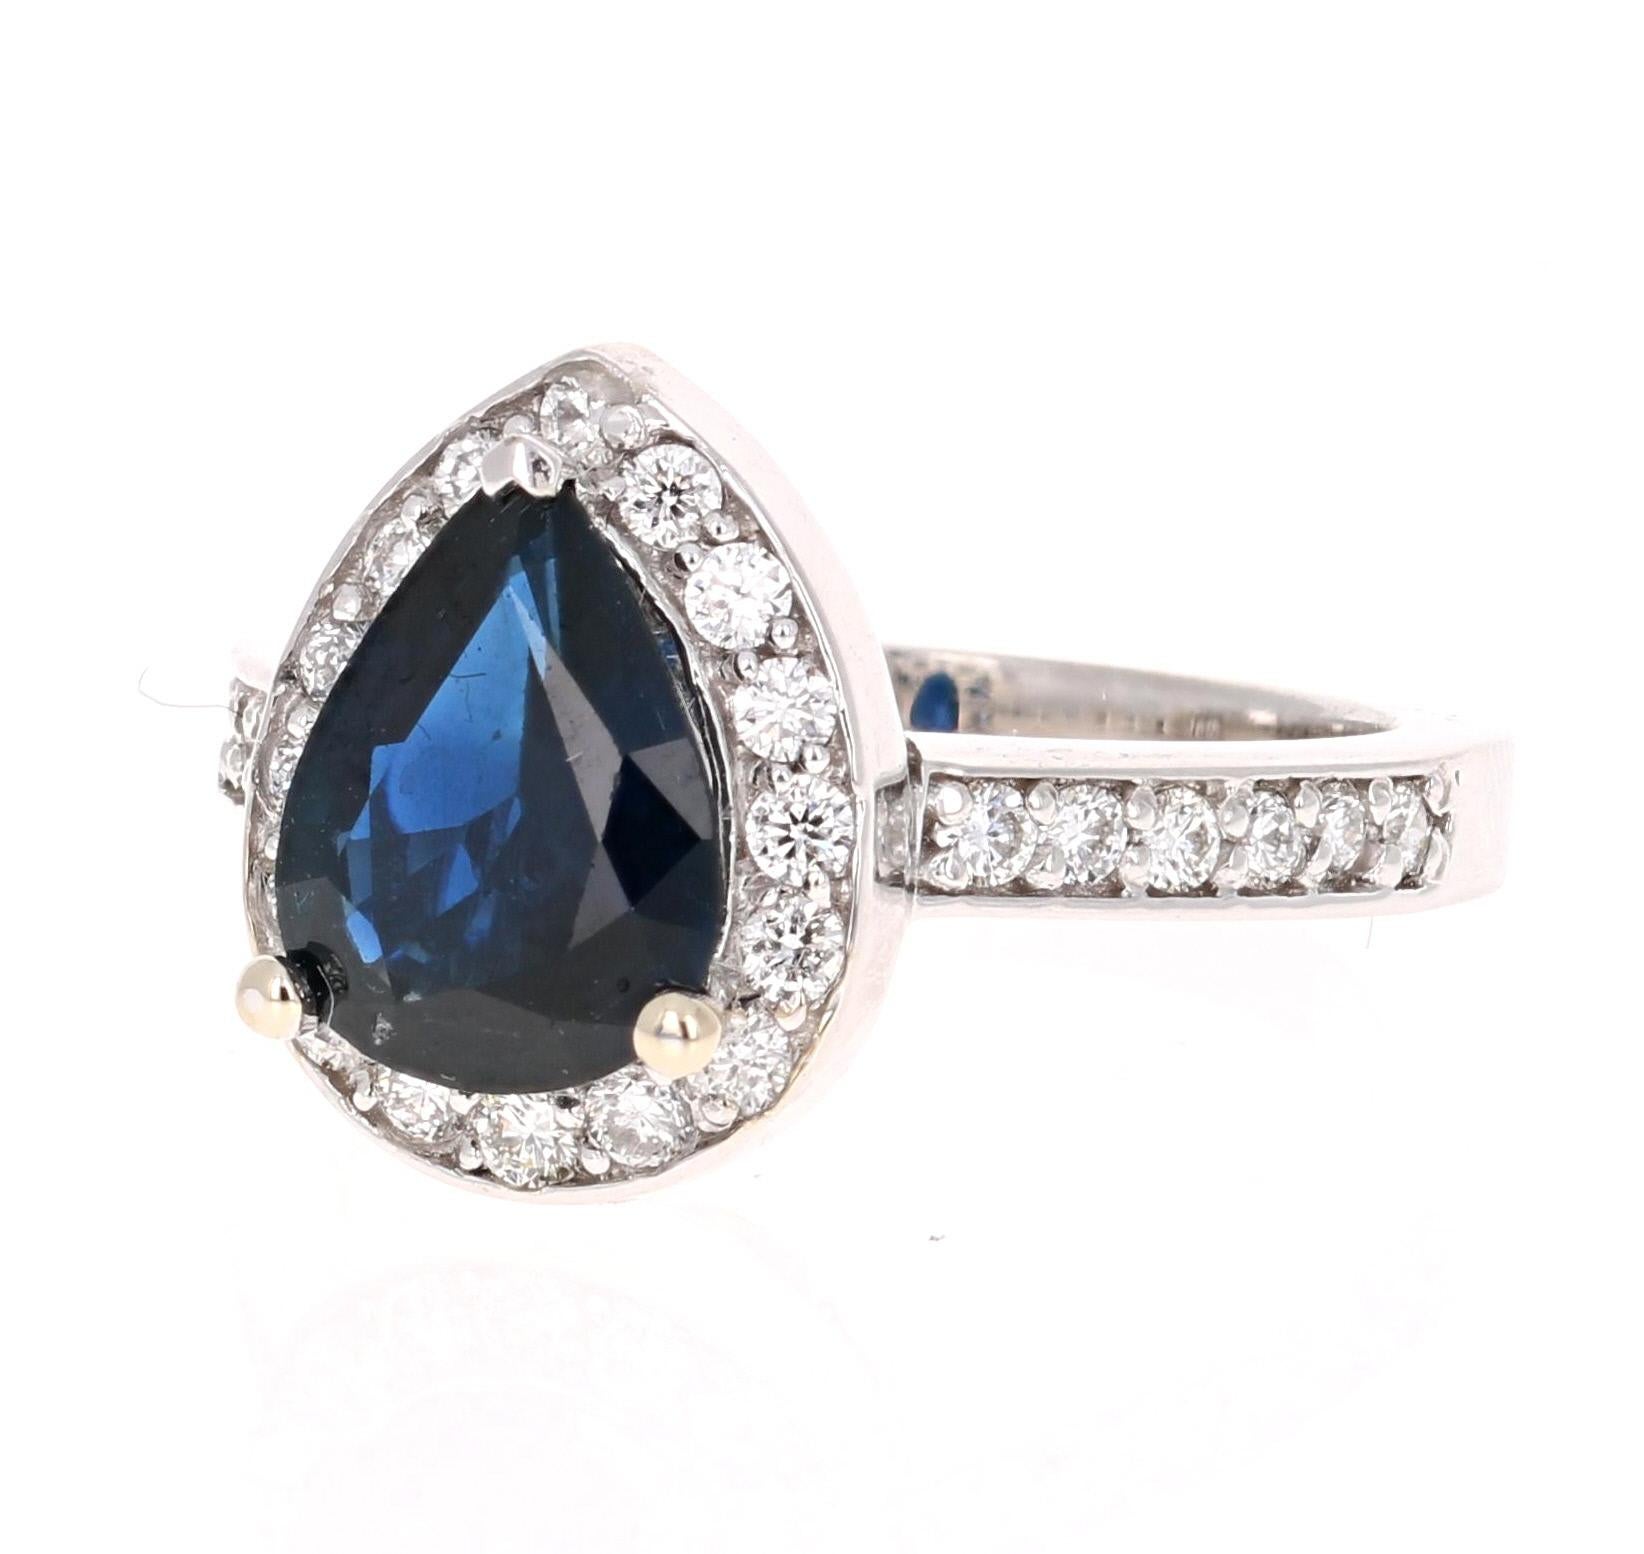 Gorgeous Engagement ring or Cocktail ring!   This beautiful setting has a 1.92 carat Pear Cut Sapphire in the center of the ring and is surrounded by 28 Round Cut Diamonds that weigh 0.58 carats.  The total carat weight of the ring is 2.44 carats. 